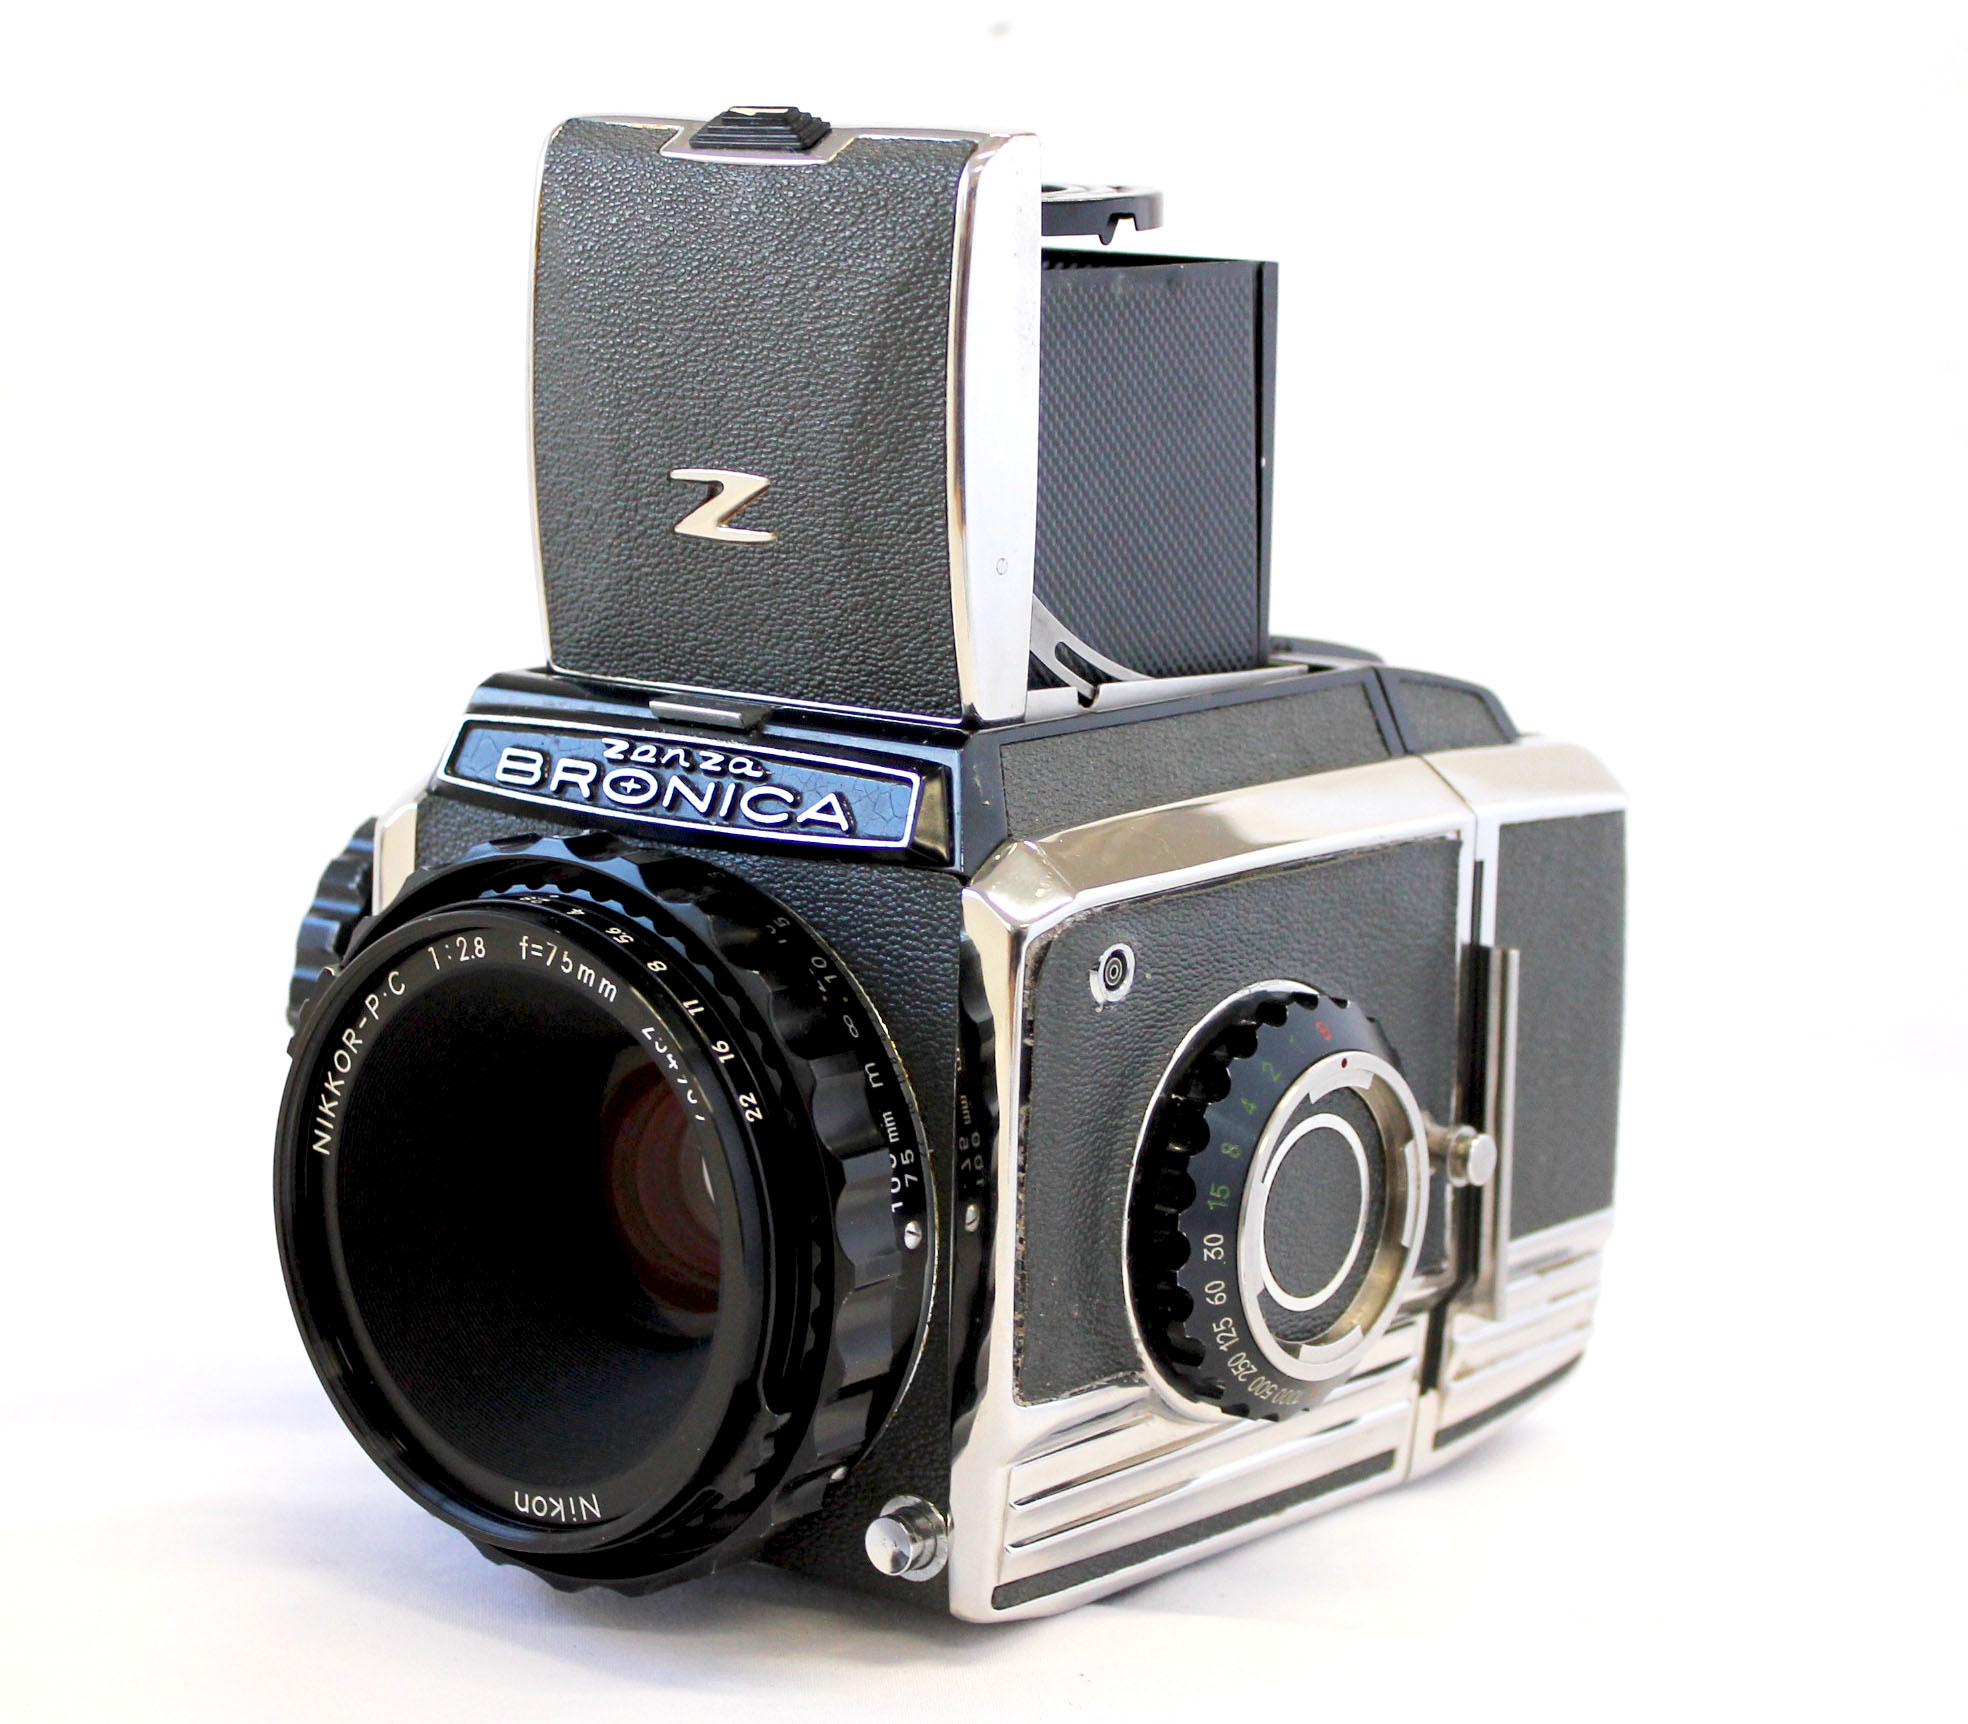 Zenza Bronica S2A Final Model (S/N CB161*) w/ Nikkor-P.C 75mm F/2.8 and 6x6 Film Back from Japan Photo 0